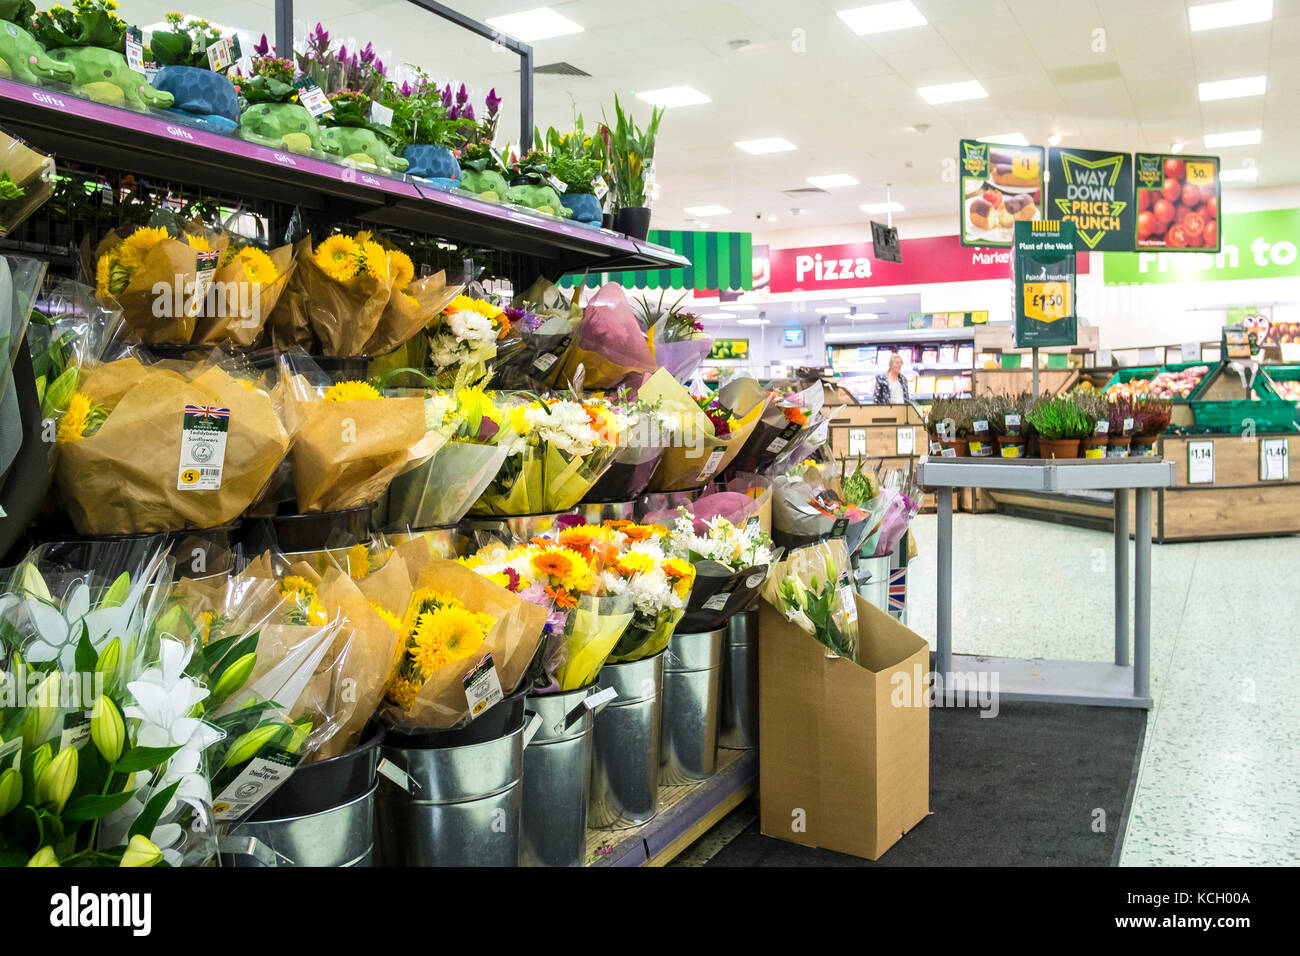 Shopping in a supermarket - bouquets of flowers on display and for sale in a Morrisons  Supermarket. Stock Photo